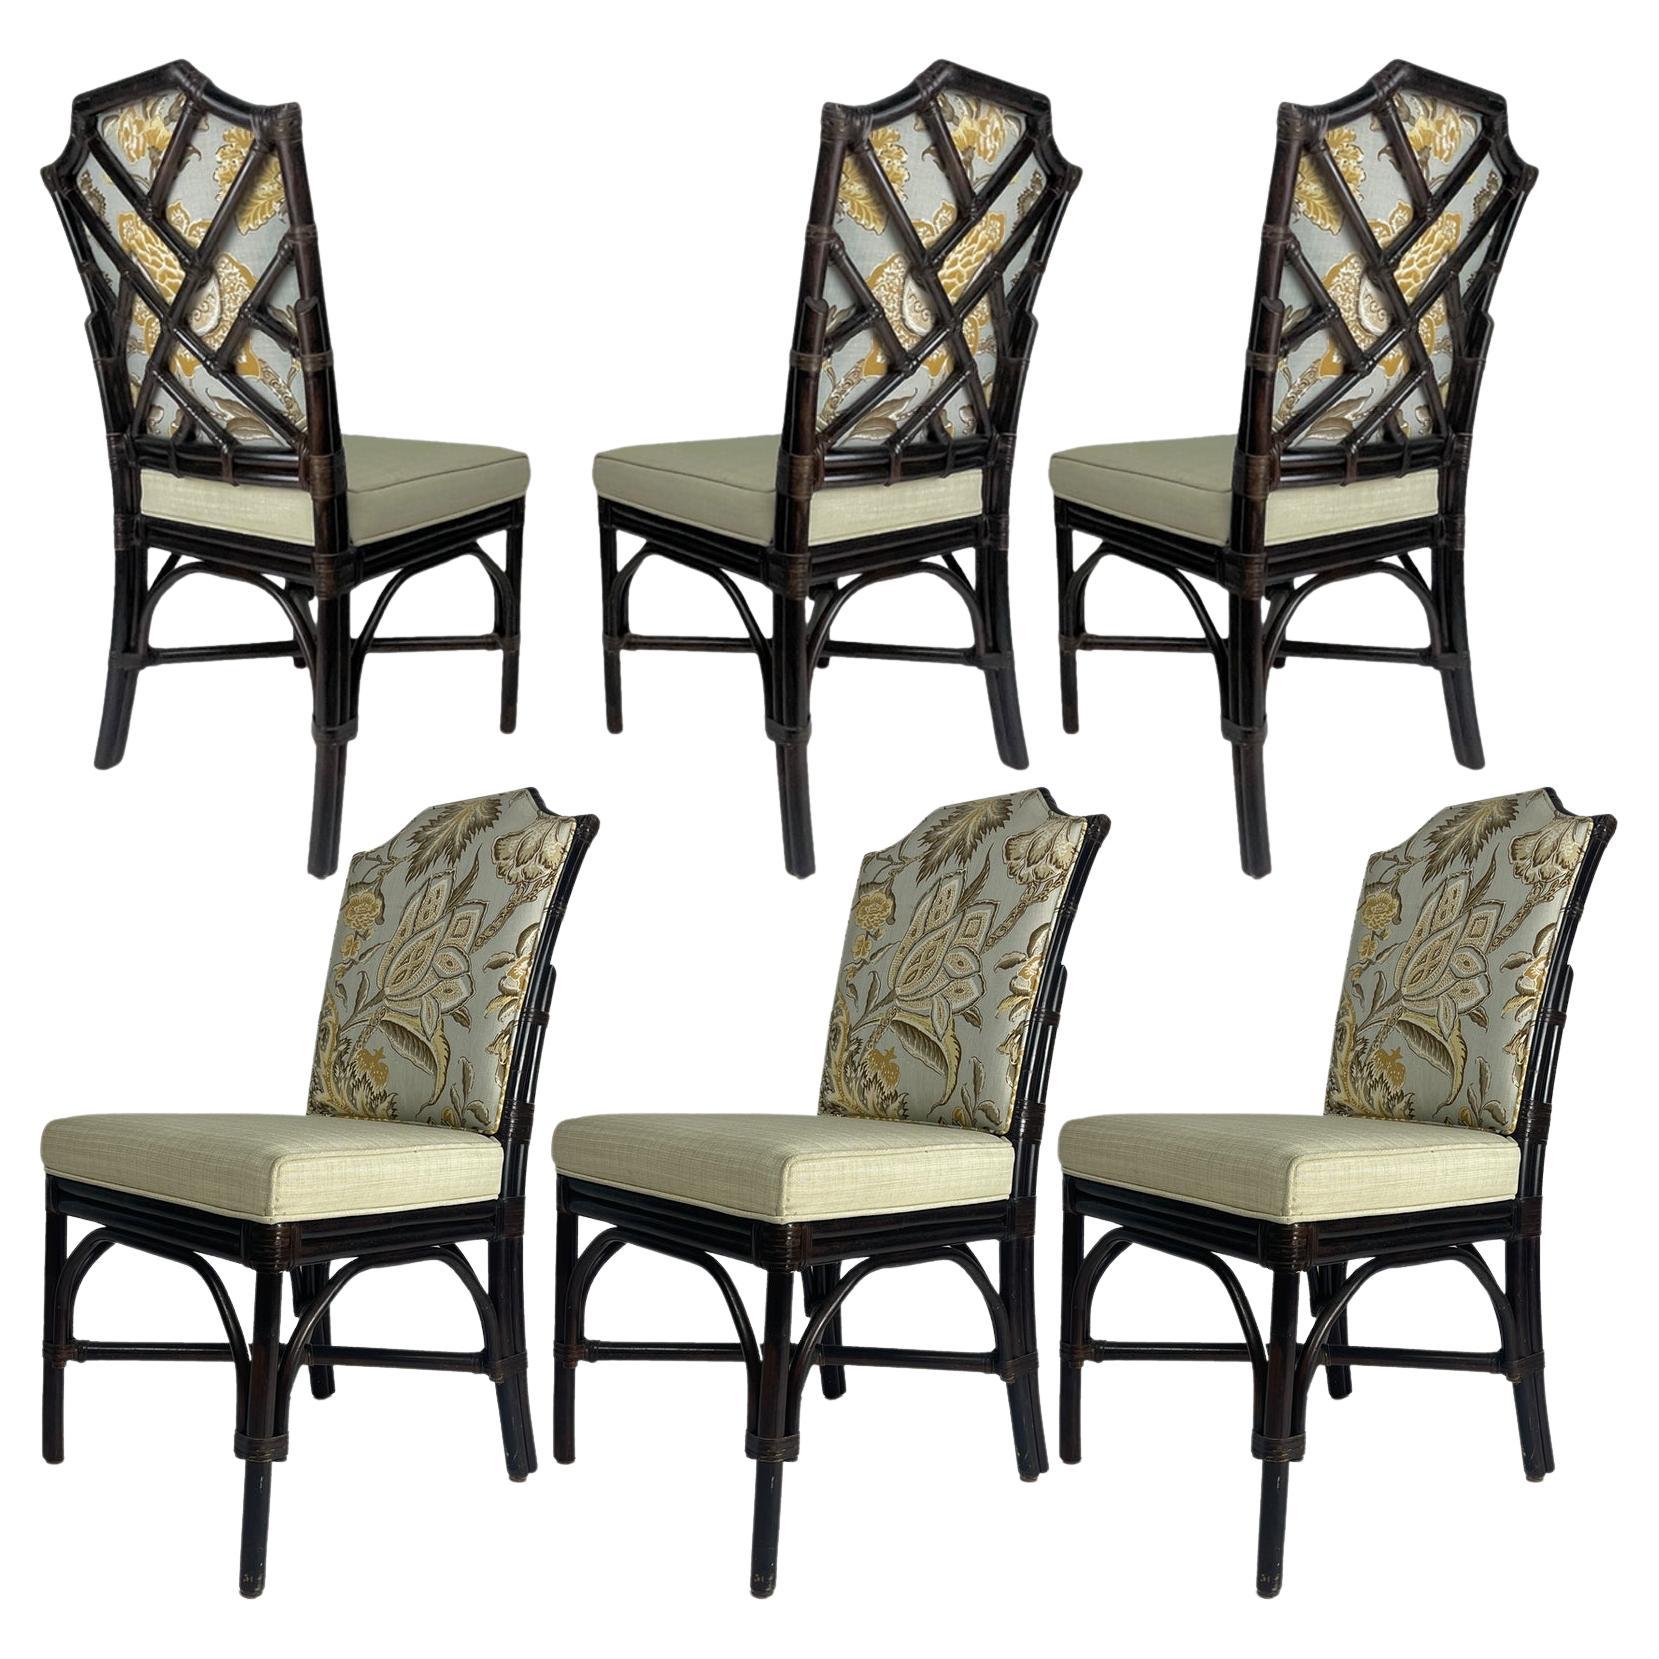 6 Chinoiserie Bamboo Rattan Chinese Chippendale Dining Chairs 12 Available